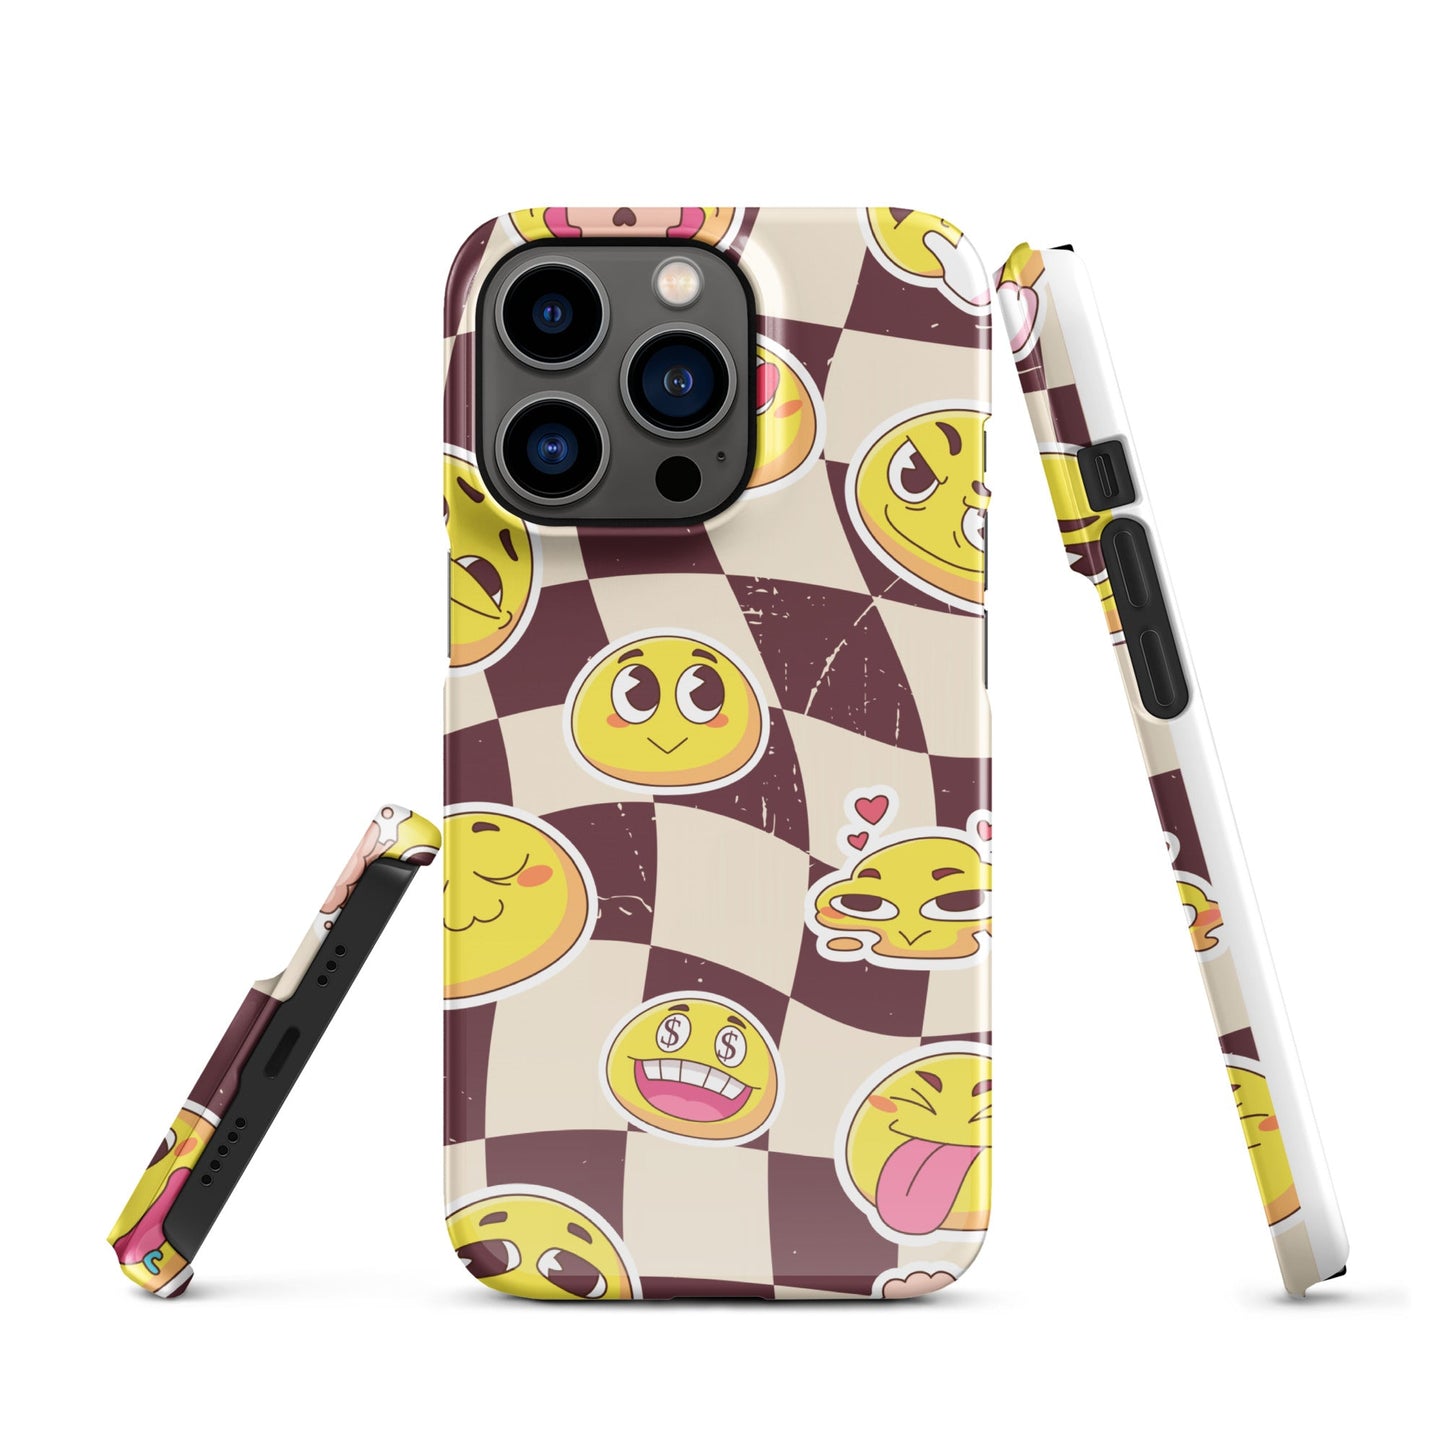 Vintage Emoji Snap Case for iPhone - Retro Charm with Modern Protection